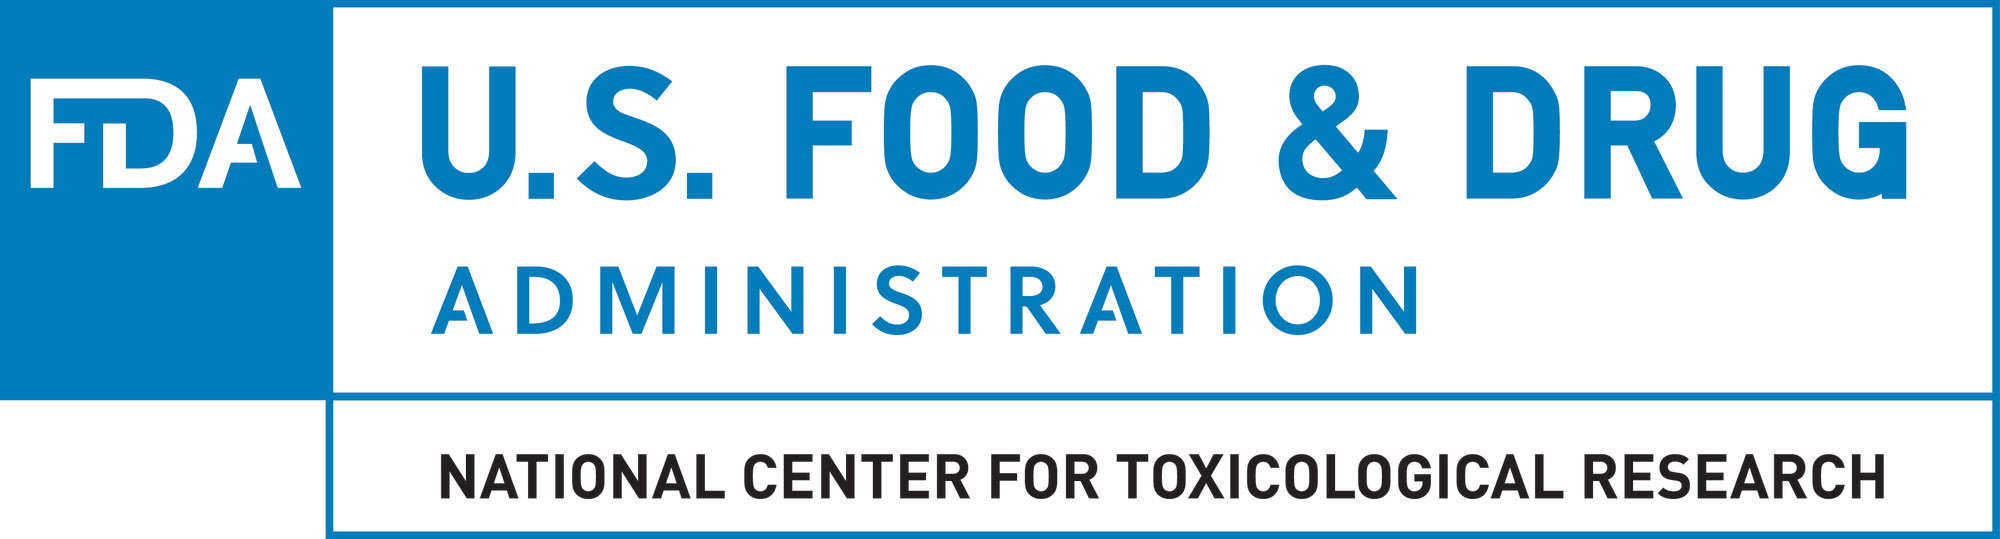 National Center for Toxicological Research (NCTR) logo